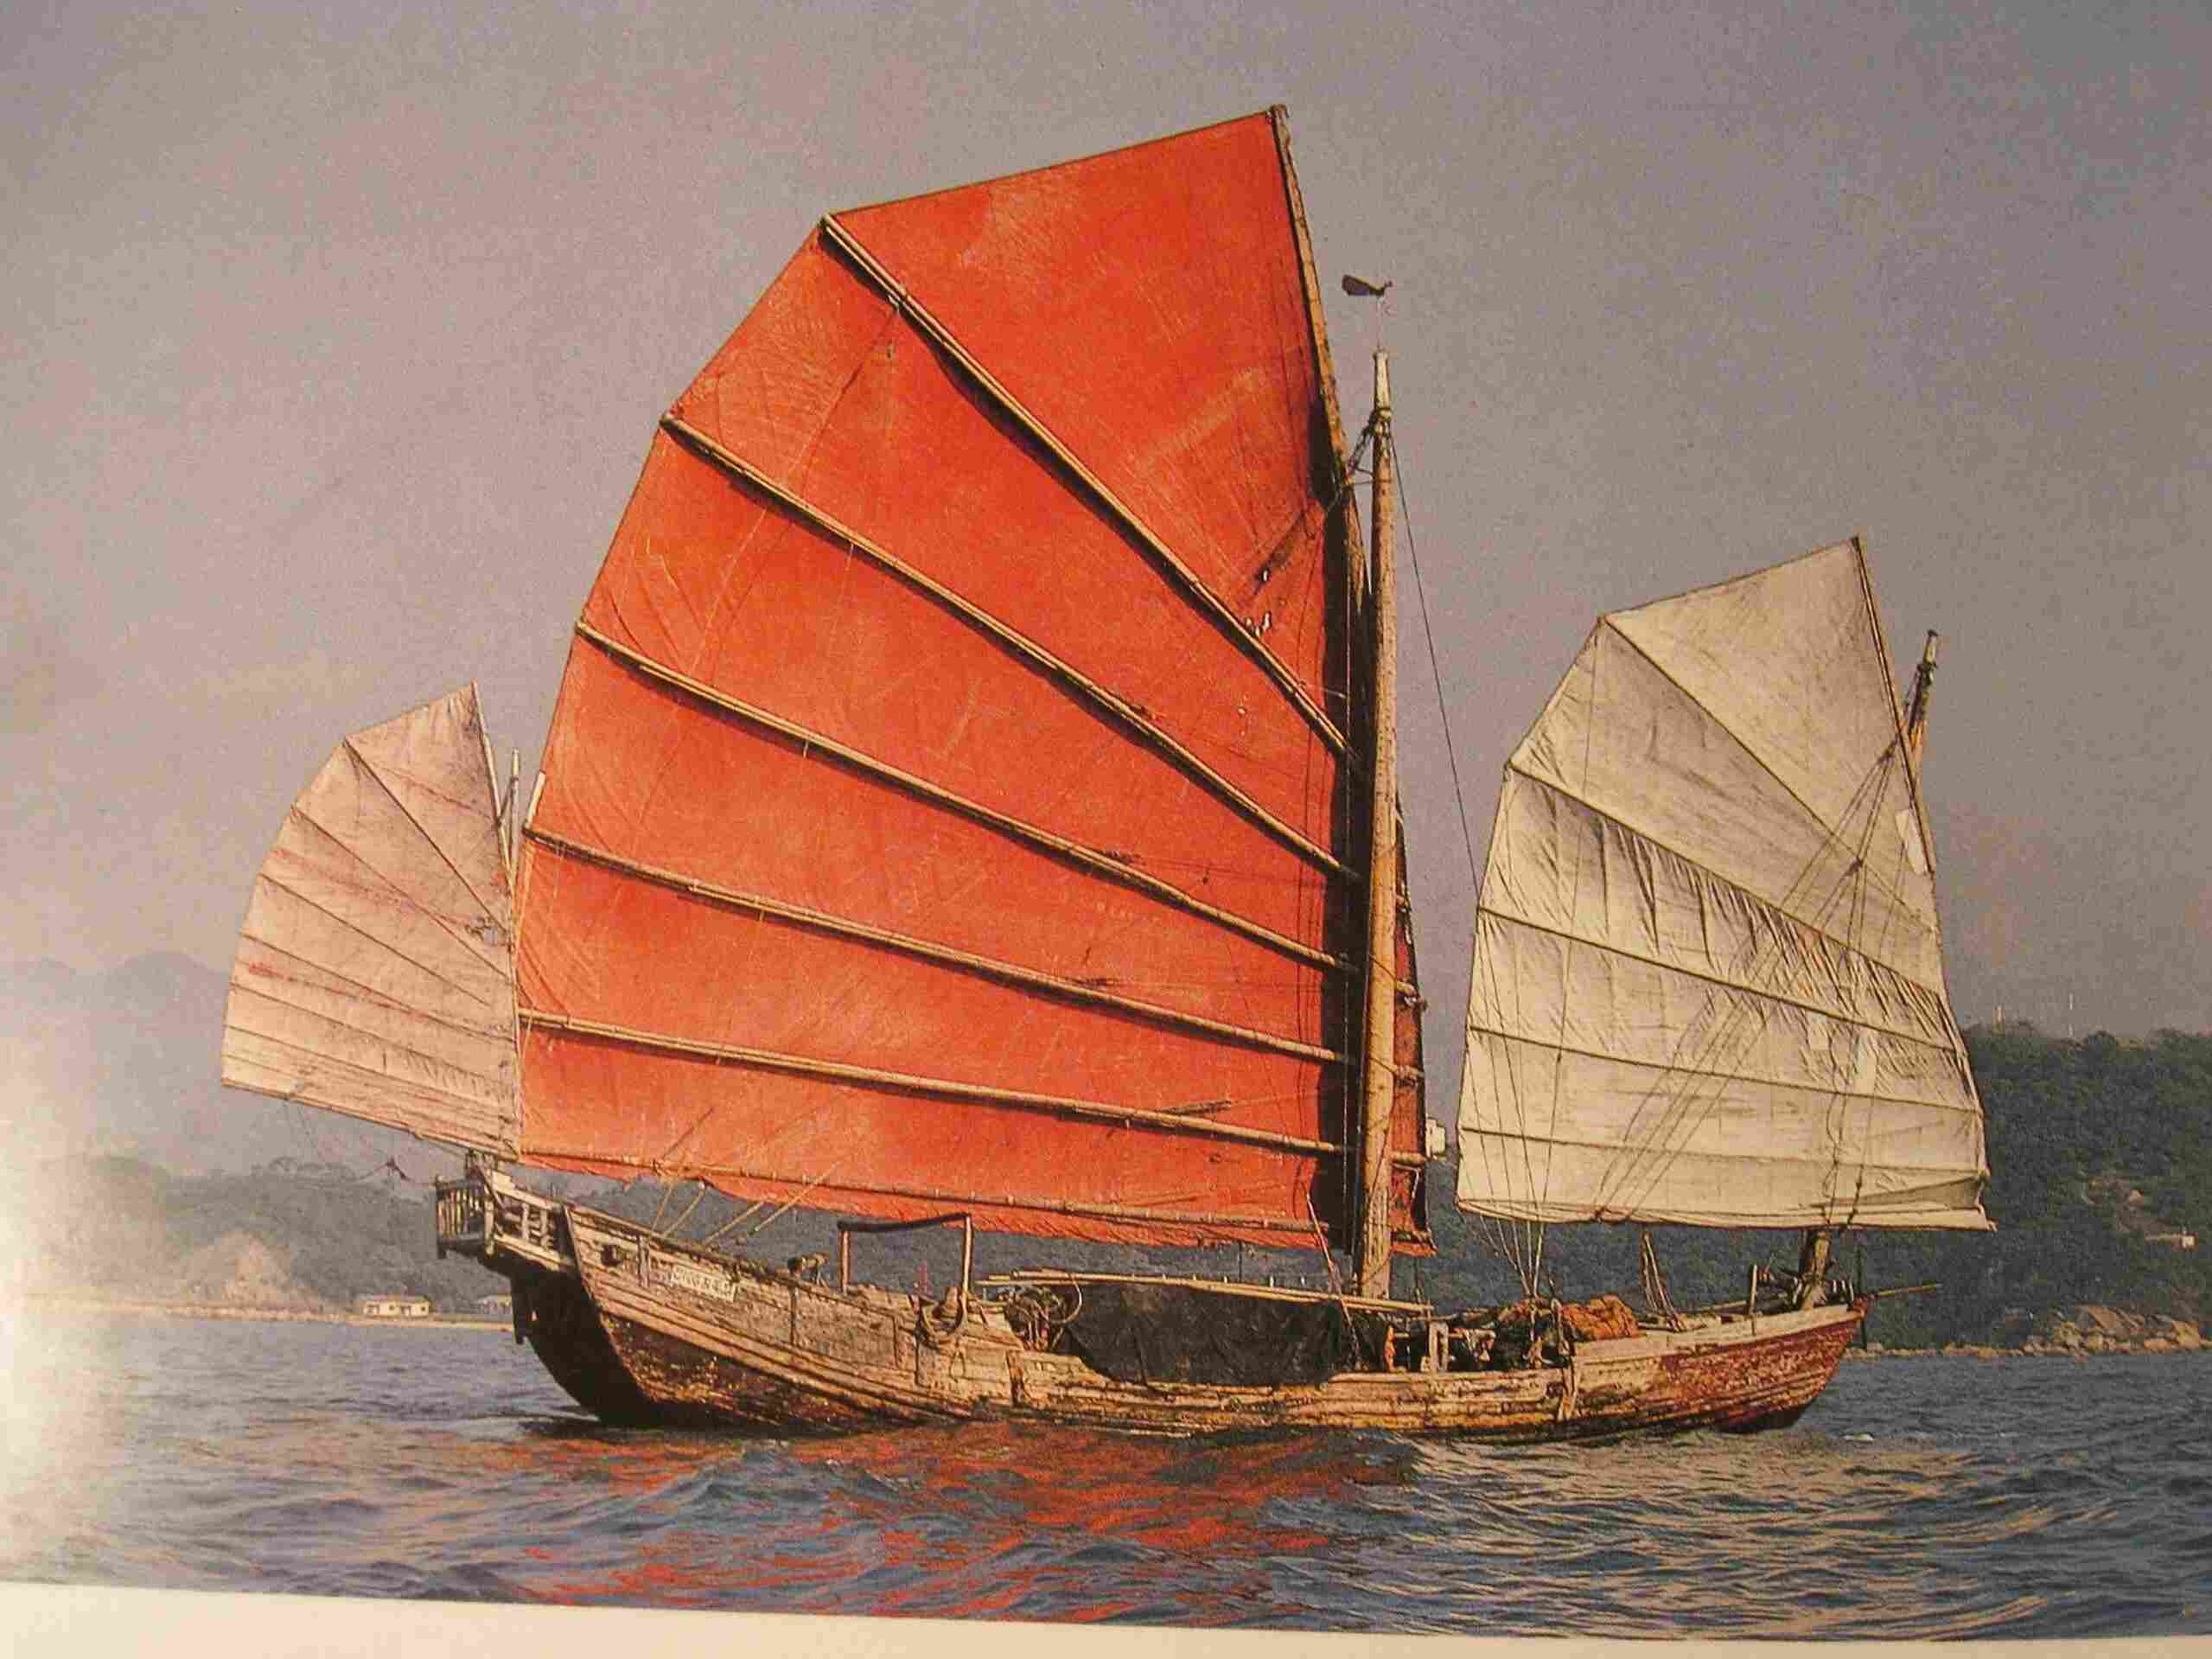 chinese junk sailboats for sale